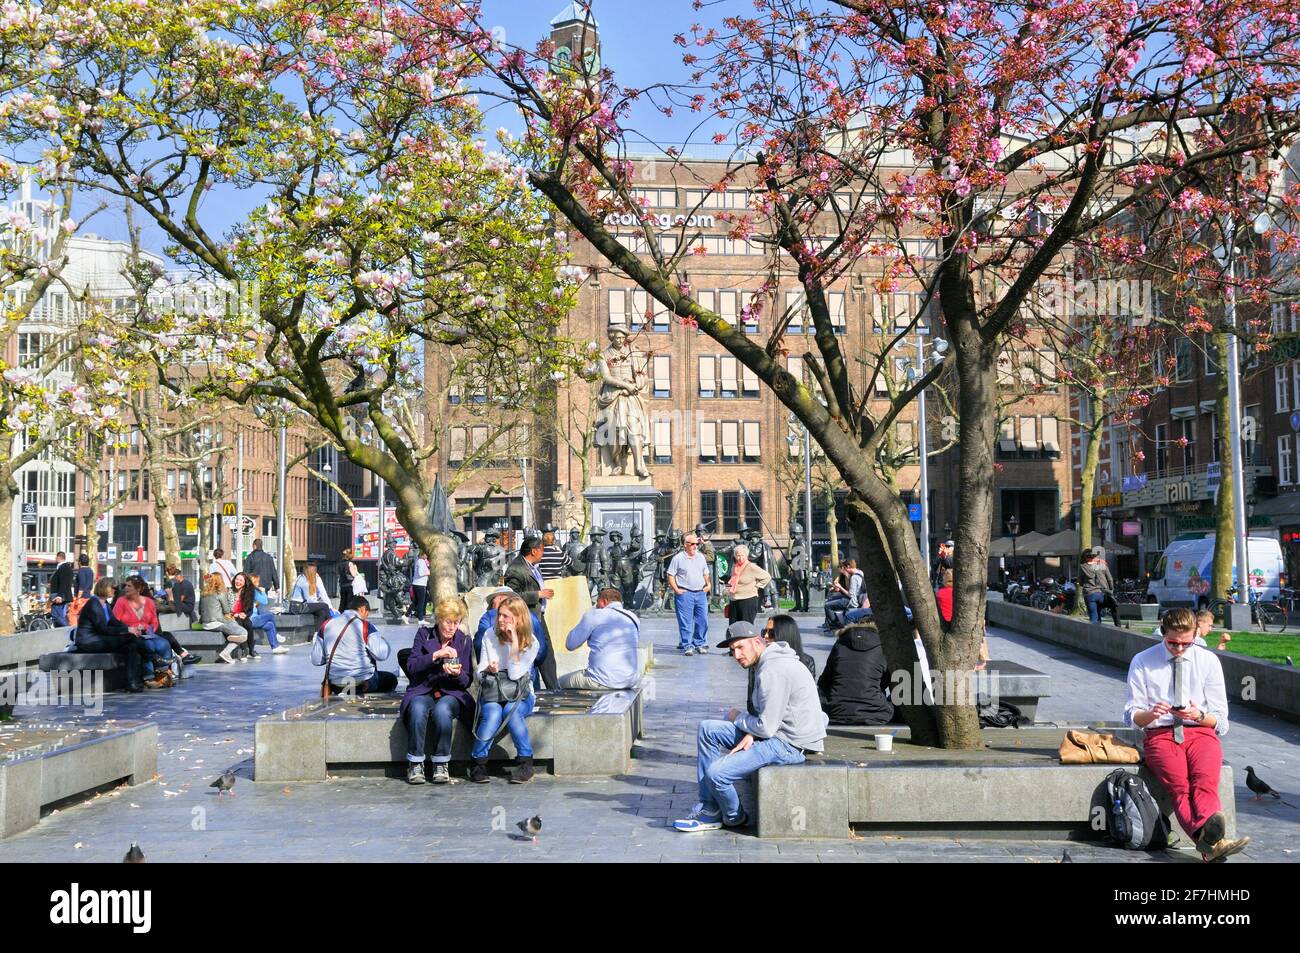 People relaxing in sunny spring weather under blossom trees in Rembrandt Square (Rembrandtplein), Amsterdam, North Holland, Netherlands, Europe Stock Photo